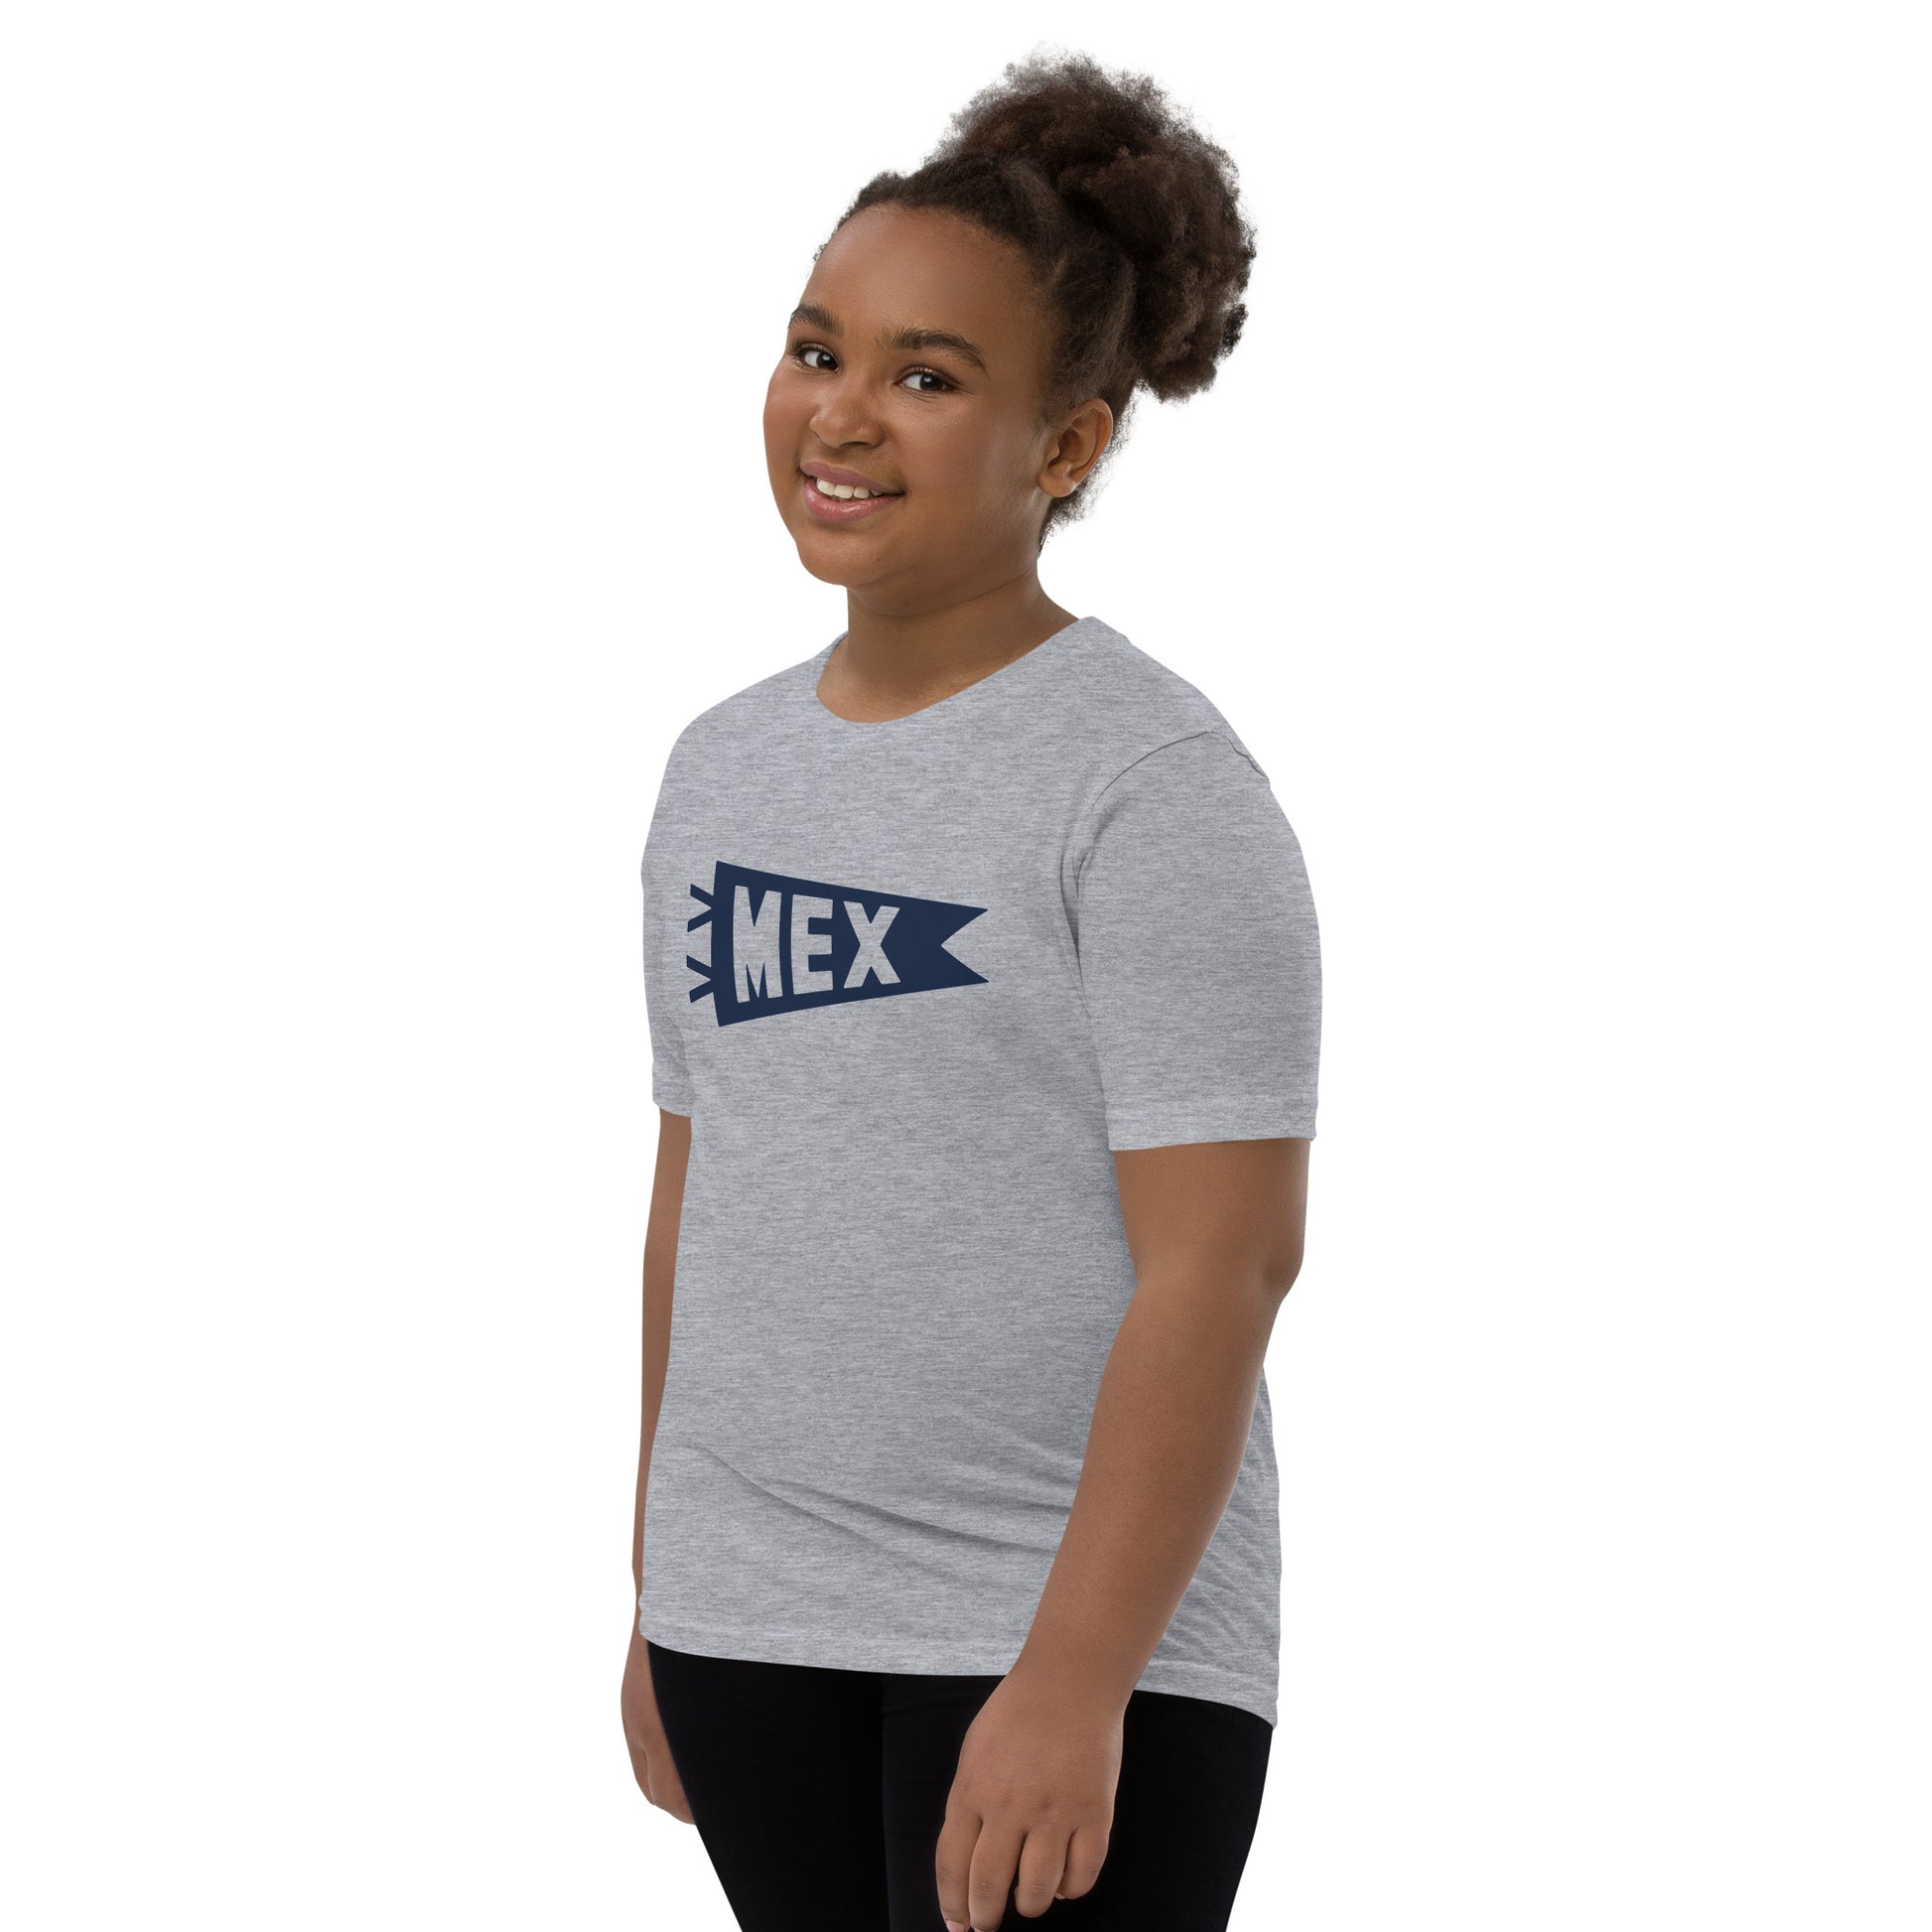 Kid's Airport Code Tee - Navy Blue Graphic • MEX Mexico City • YHM Designs - Image 04